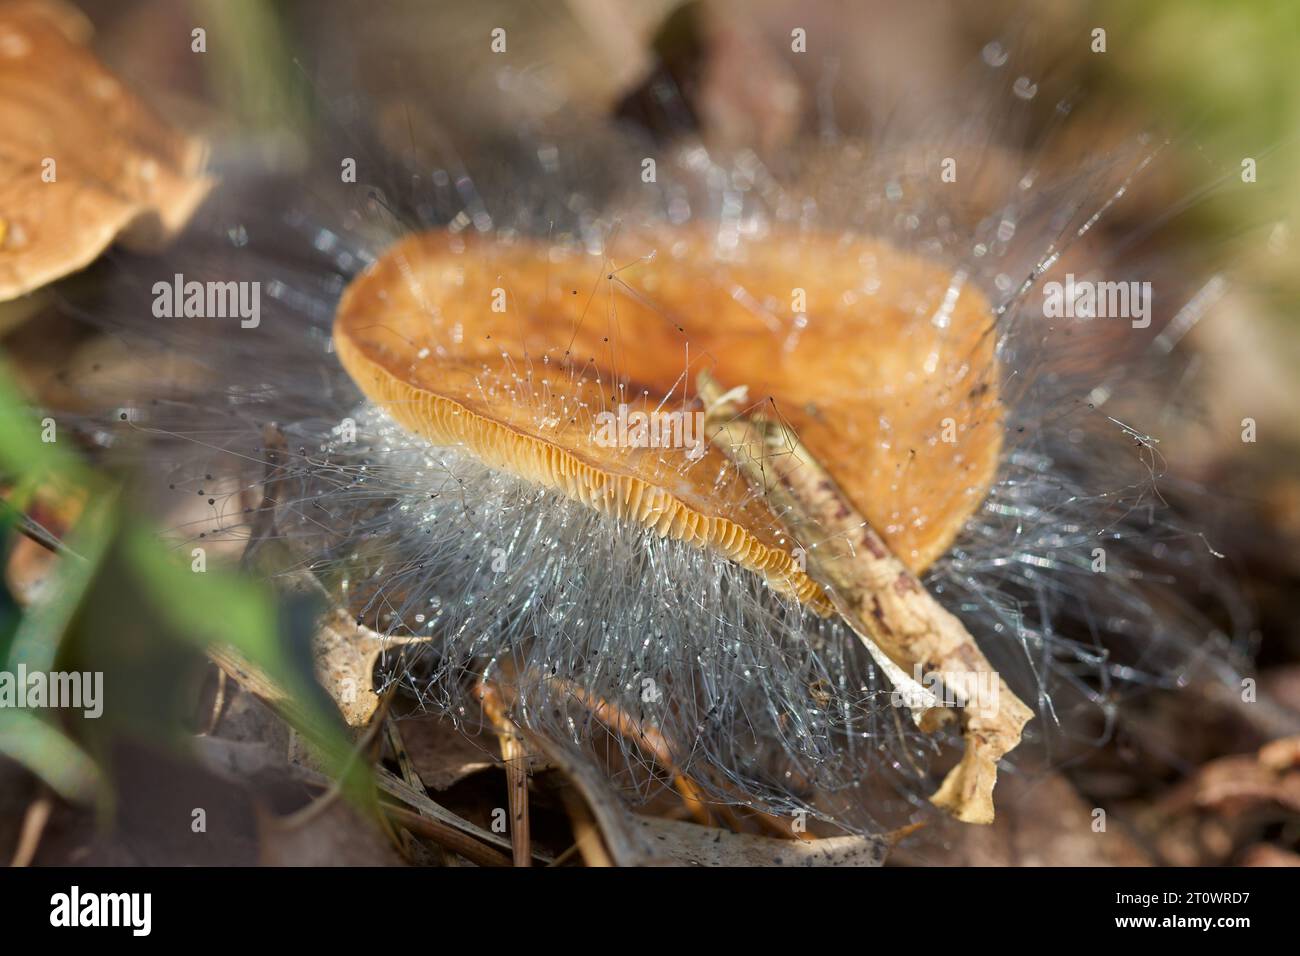 Fungus on a fungus! the Bonnet Mould fungus, Spinellus fusiger parasitizes ageing wild mushrooms, turning them into a fuzzy pin cushion Stock Photo